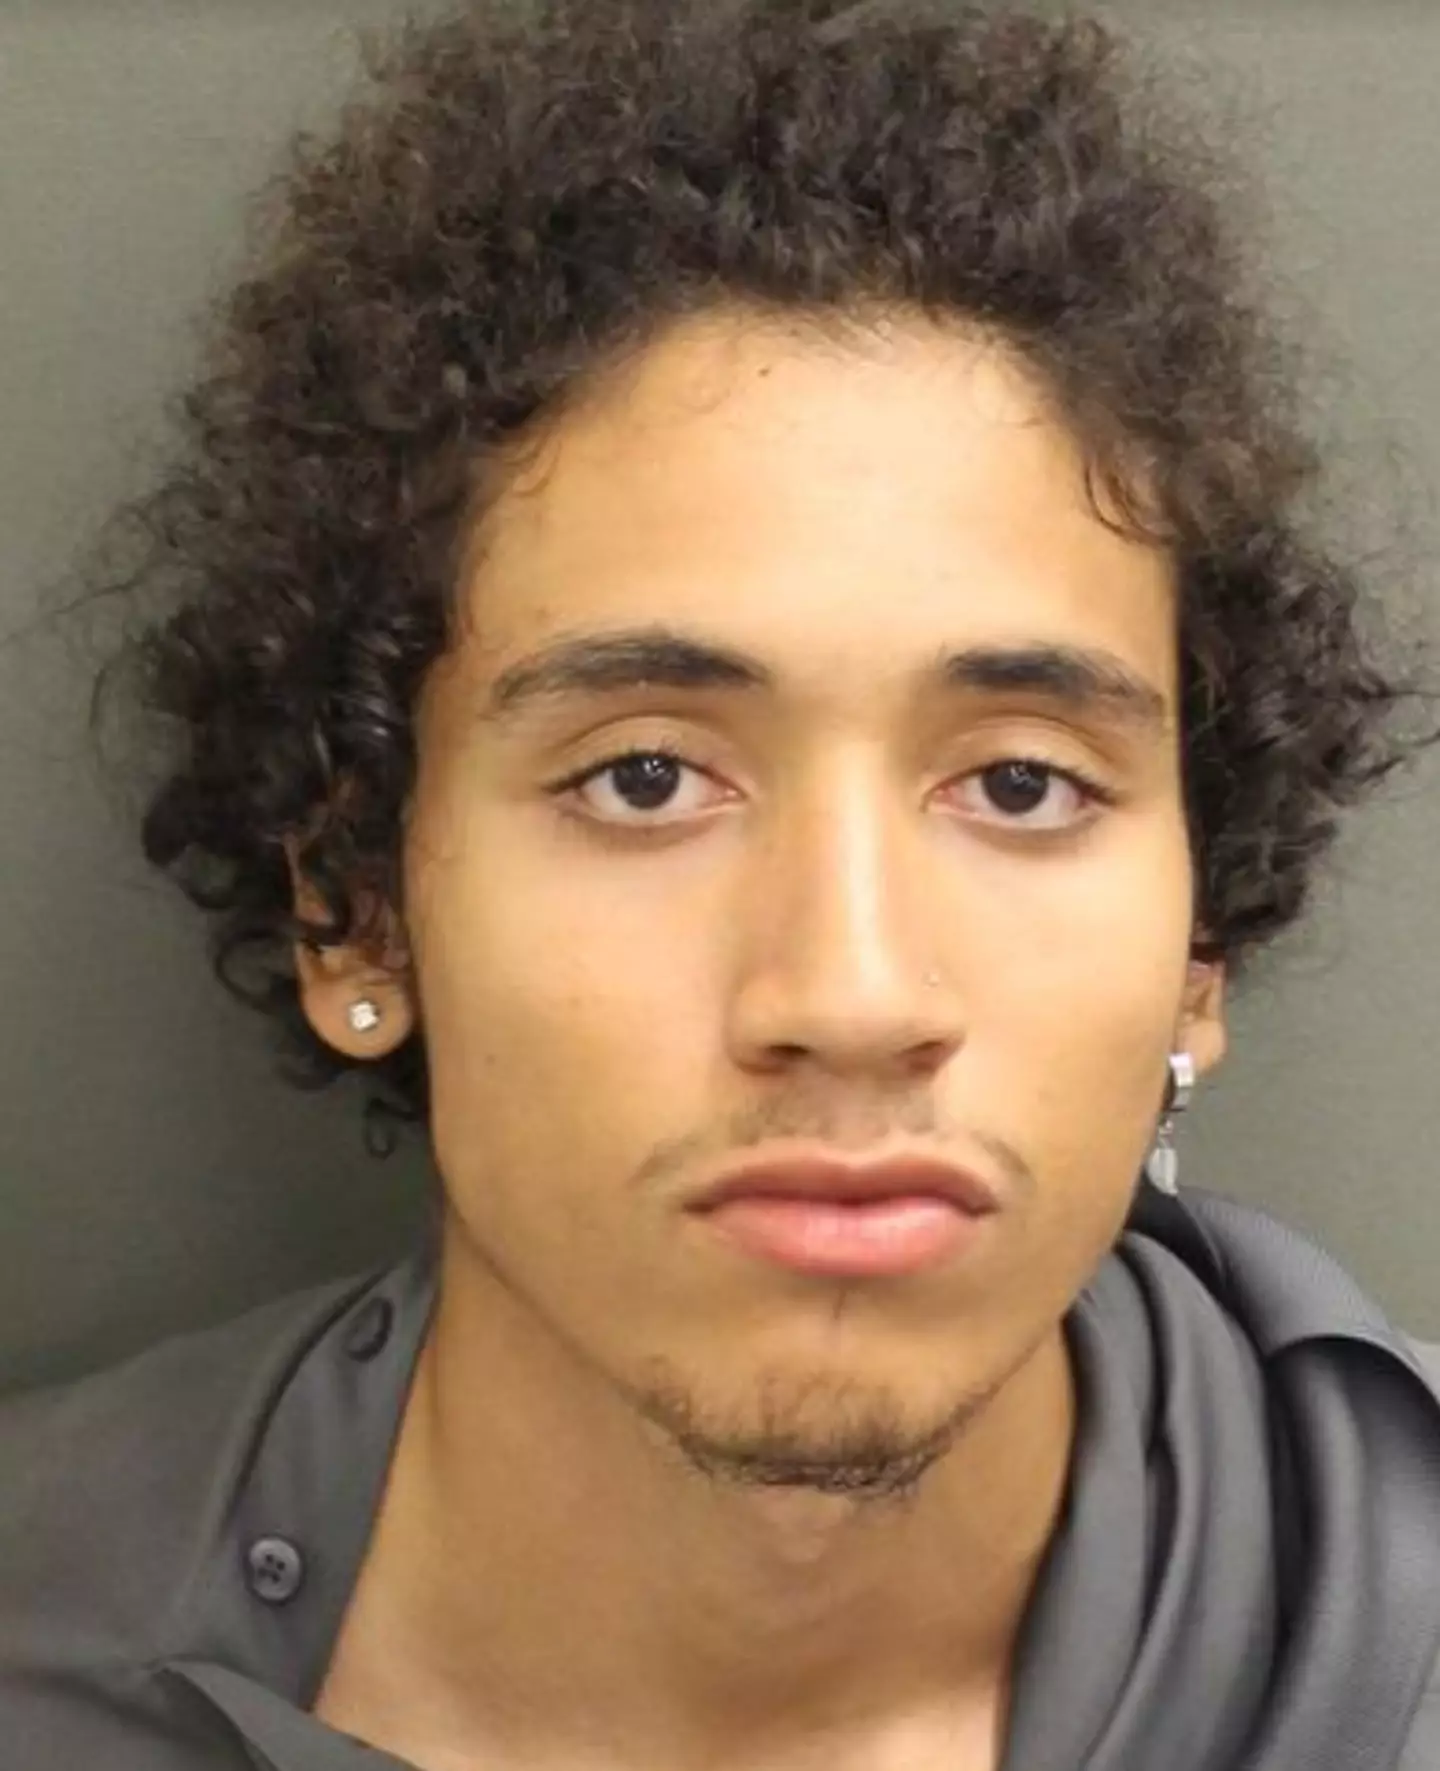 Israel Pagan was arrested by Orange County police.